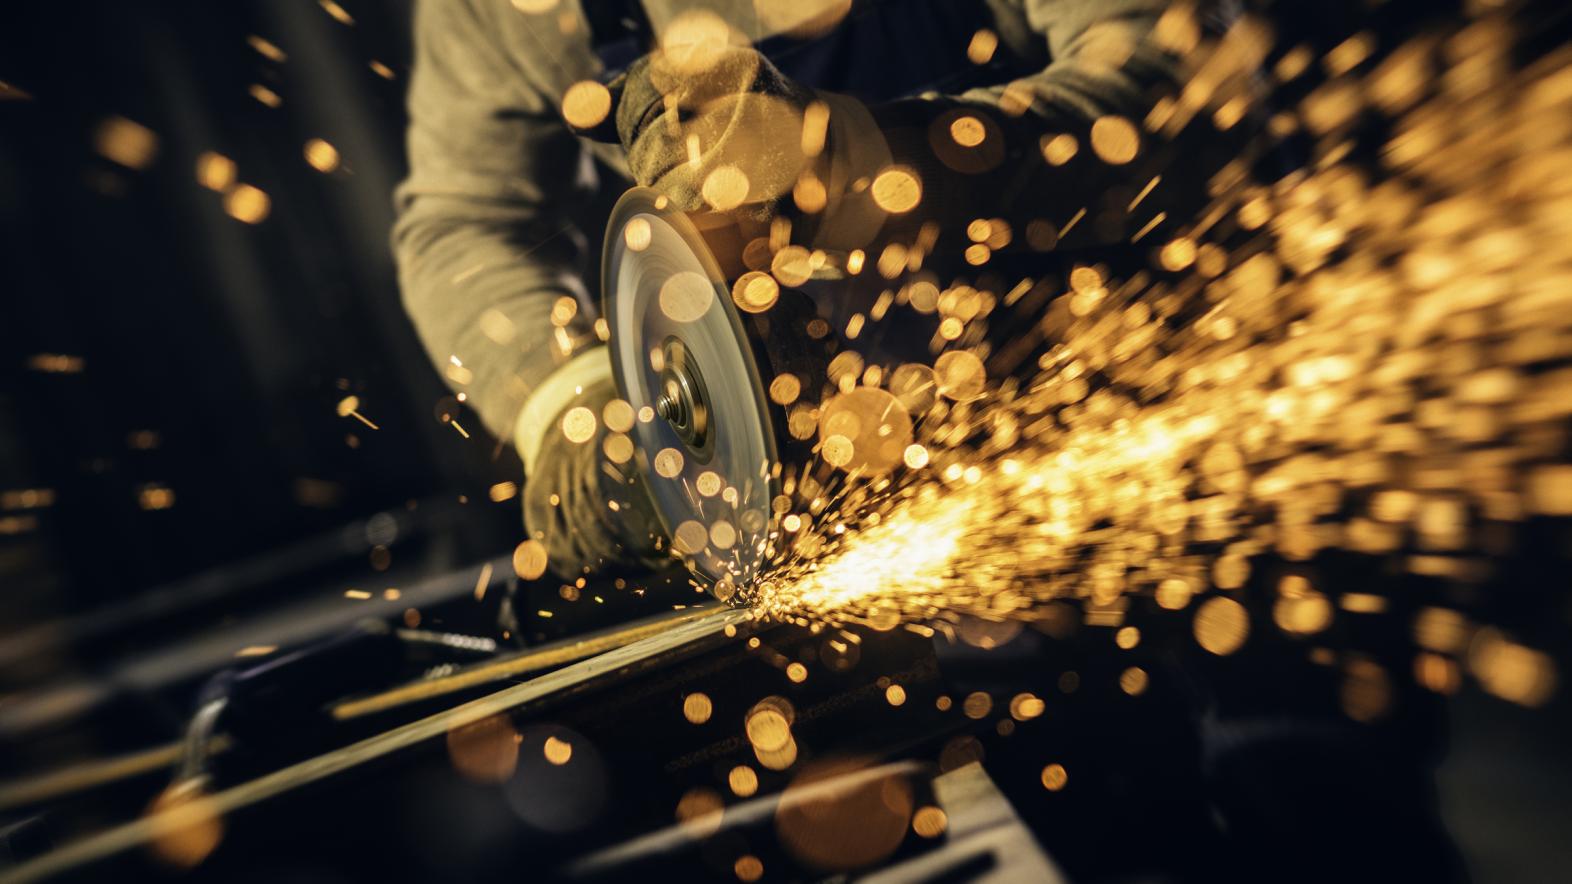 A man uses an angle grinder to cut steel on the jobsite, causing sparks to fly toward the camera